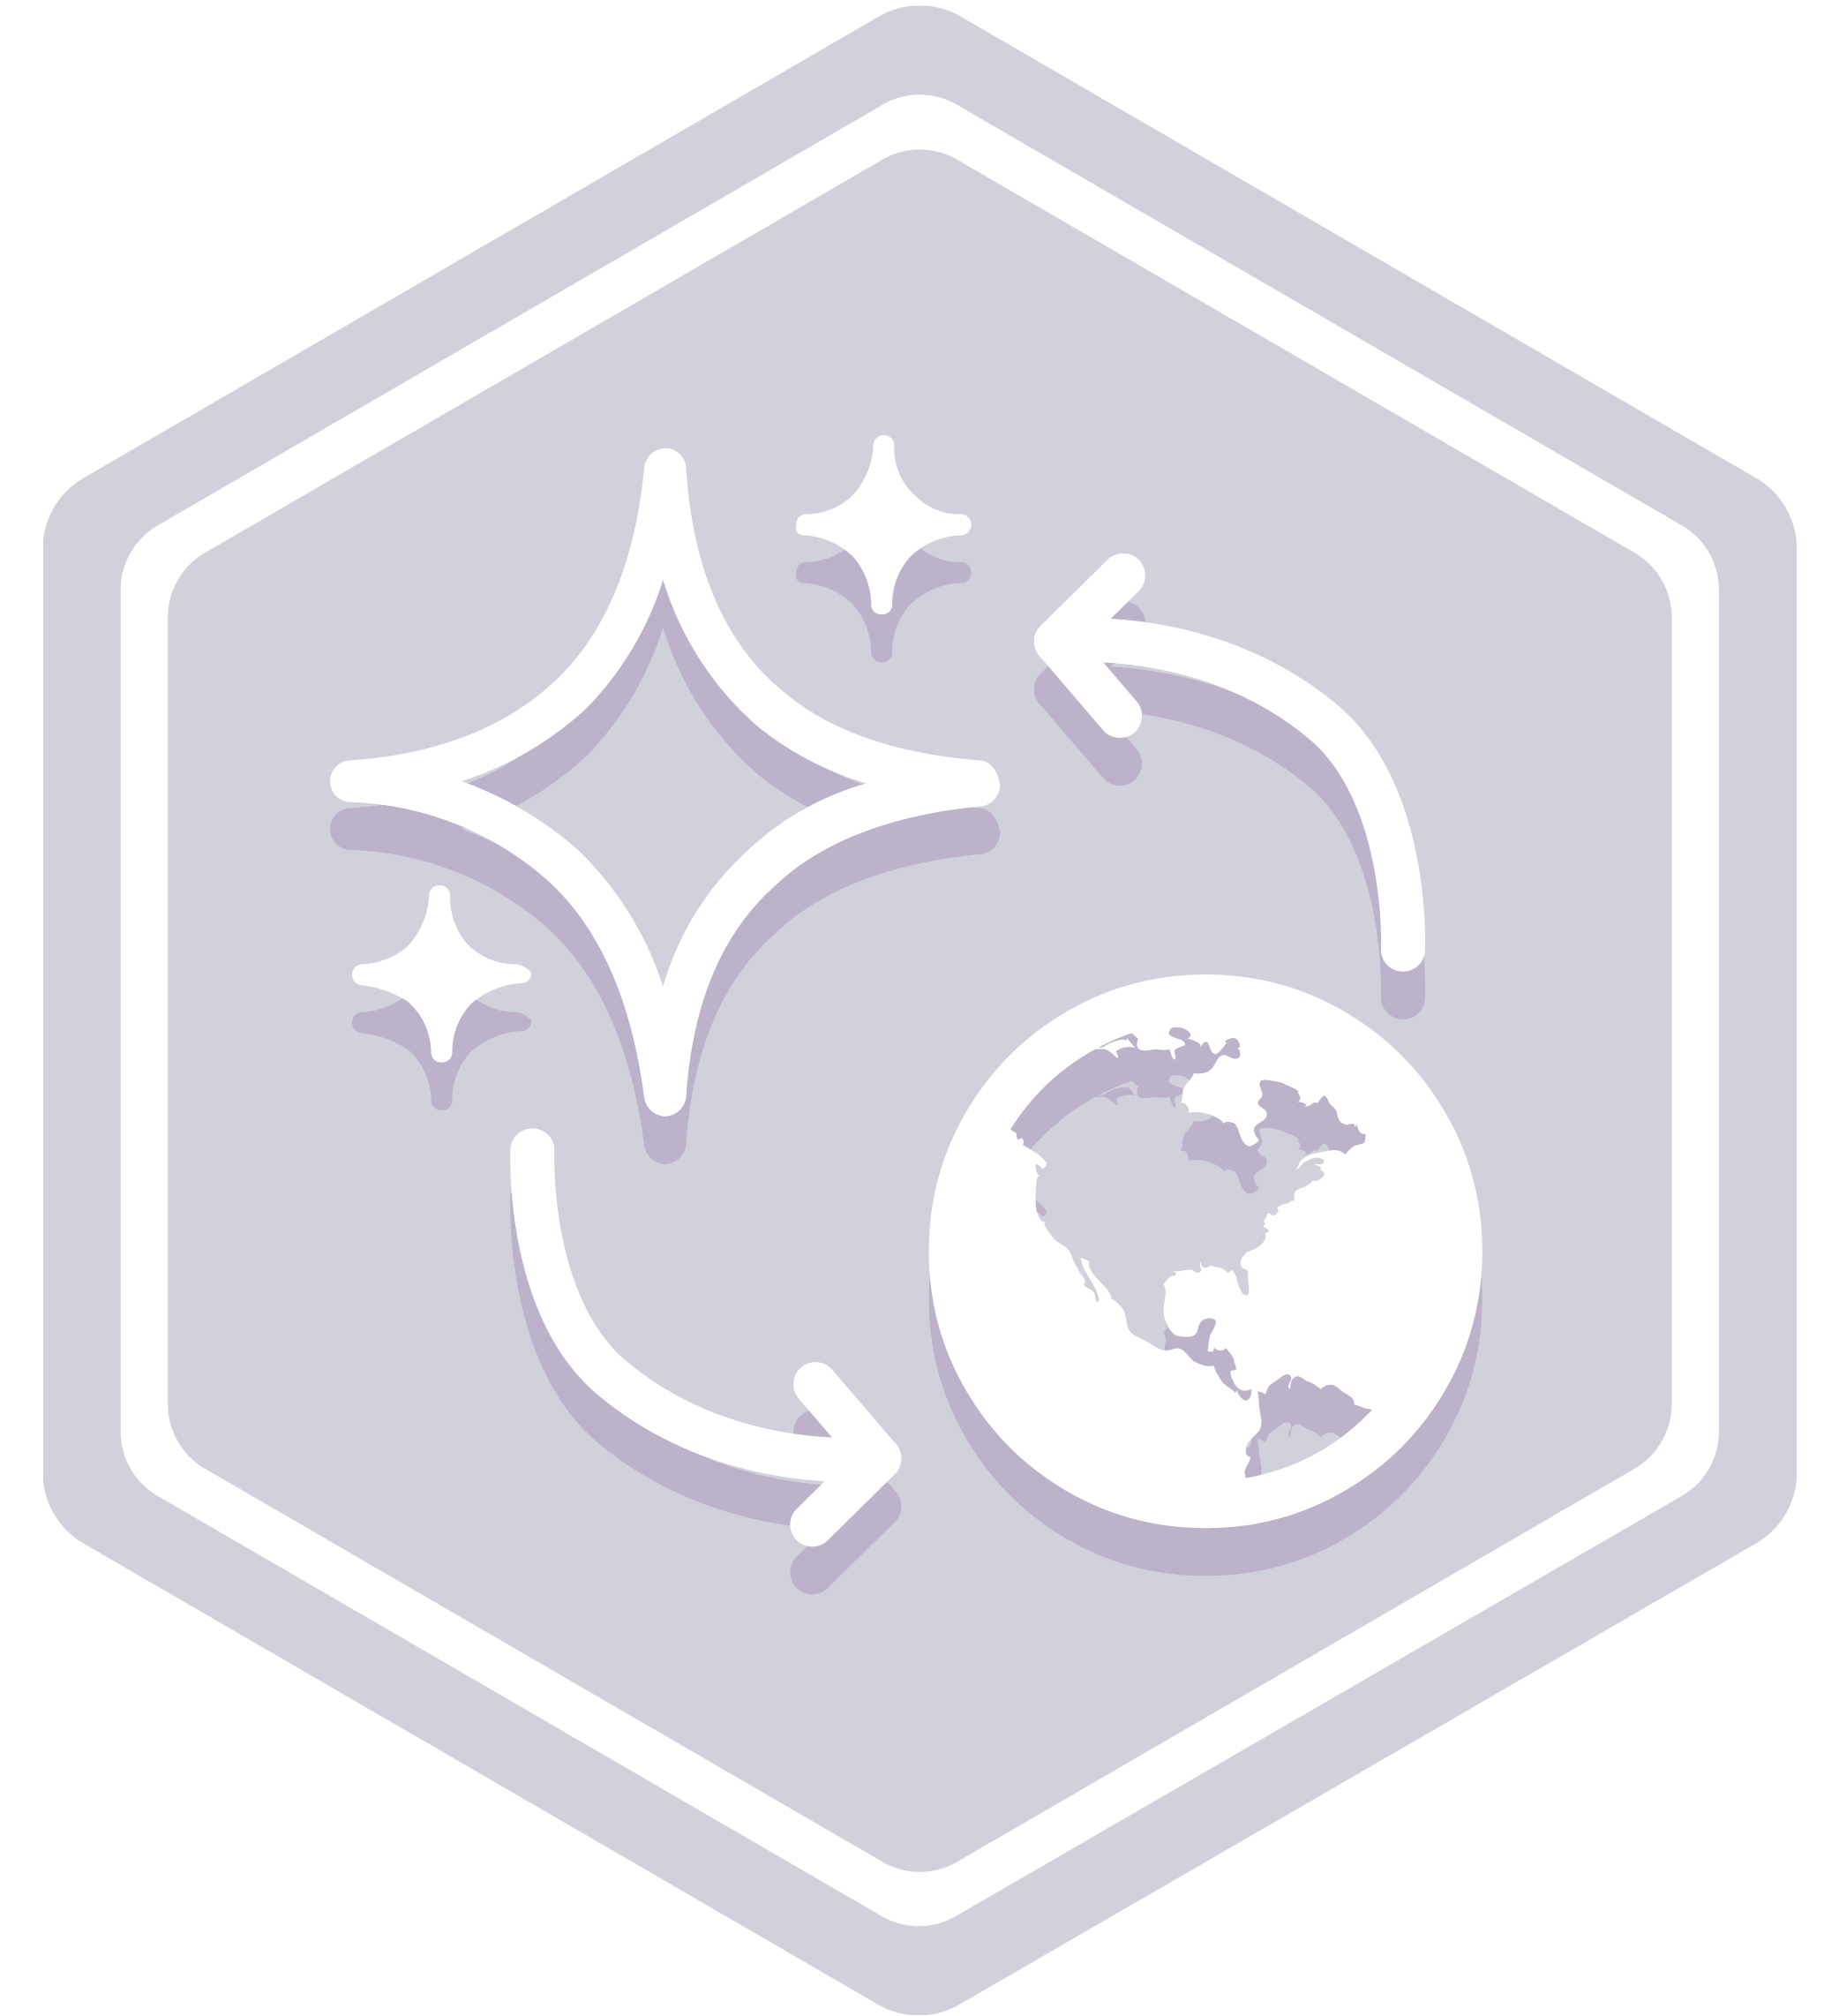 mission badge: Cross-sell on the Web Extended